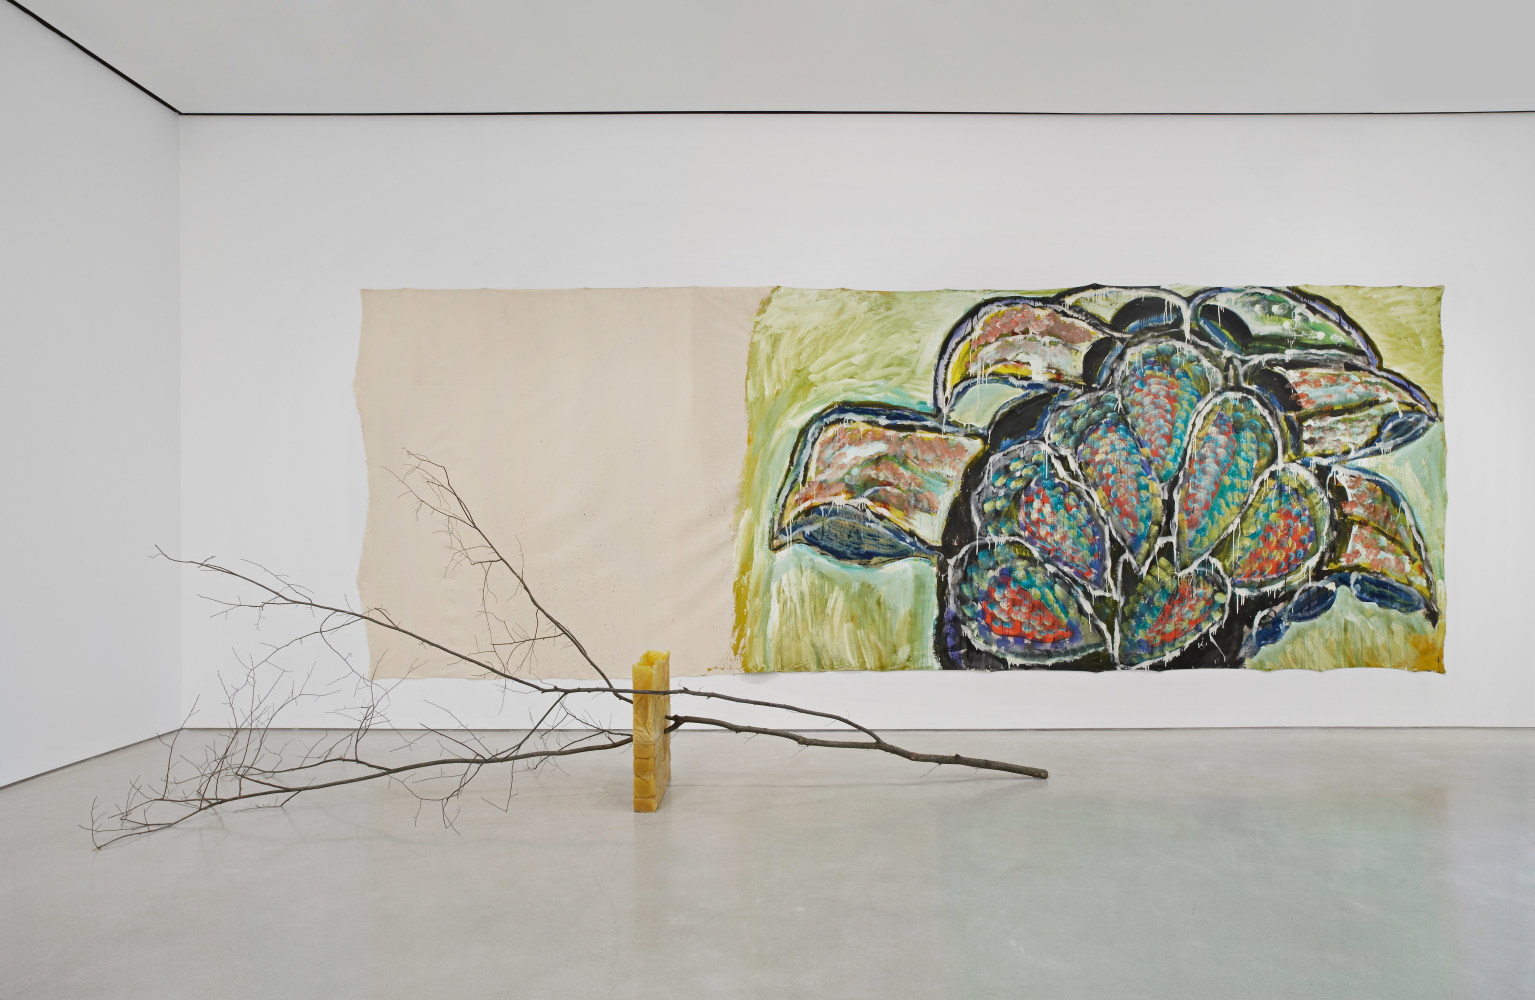 a large branch on its side supported by a wax block while a large-scale painting of foliage hangs on the wall behind it